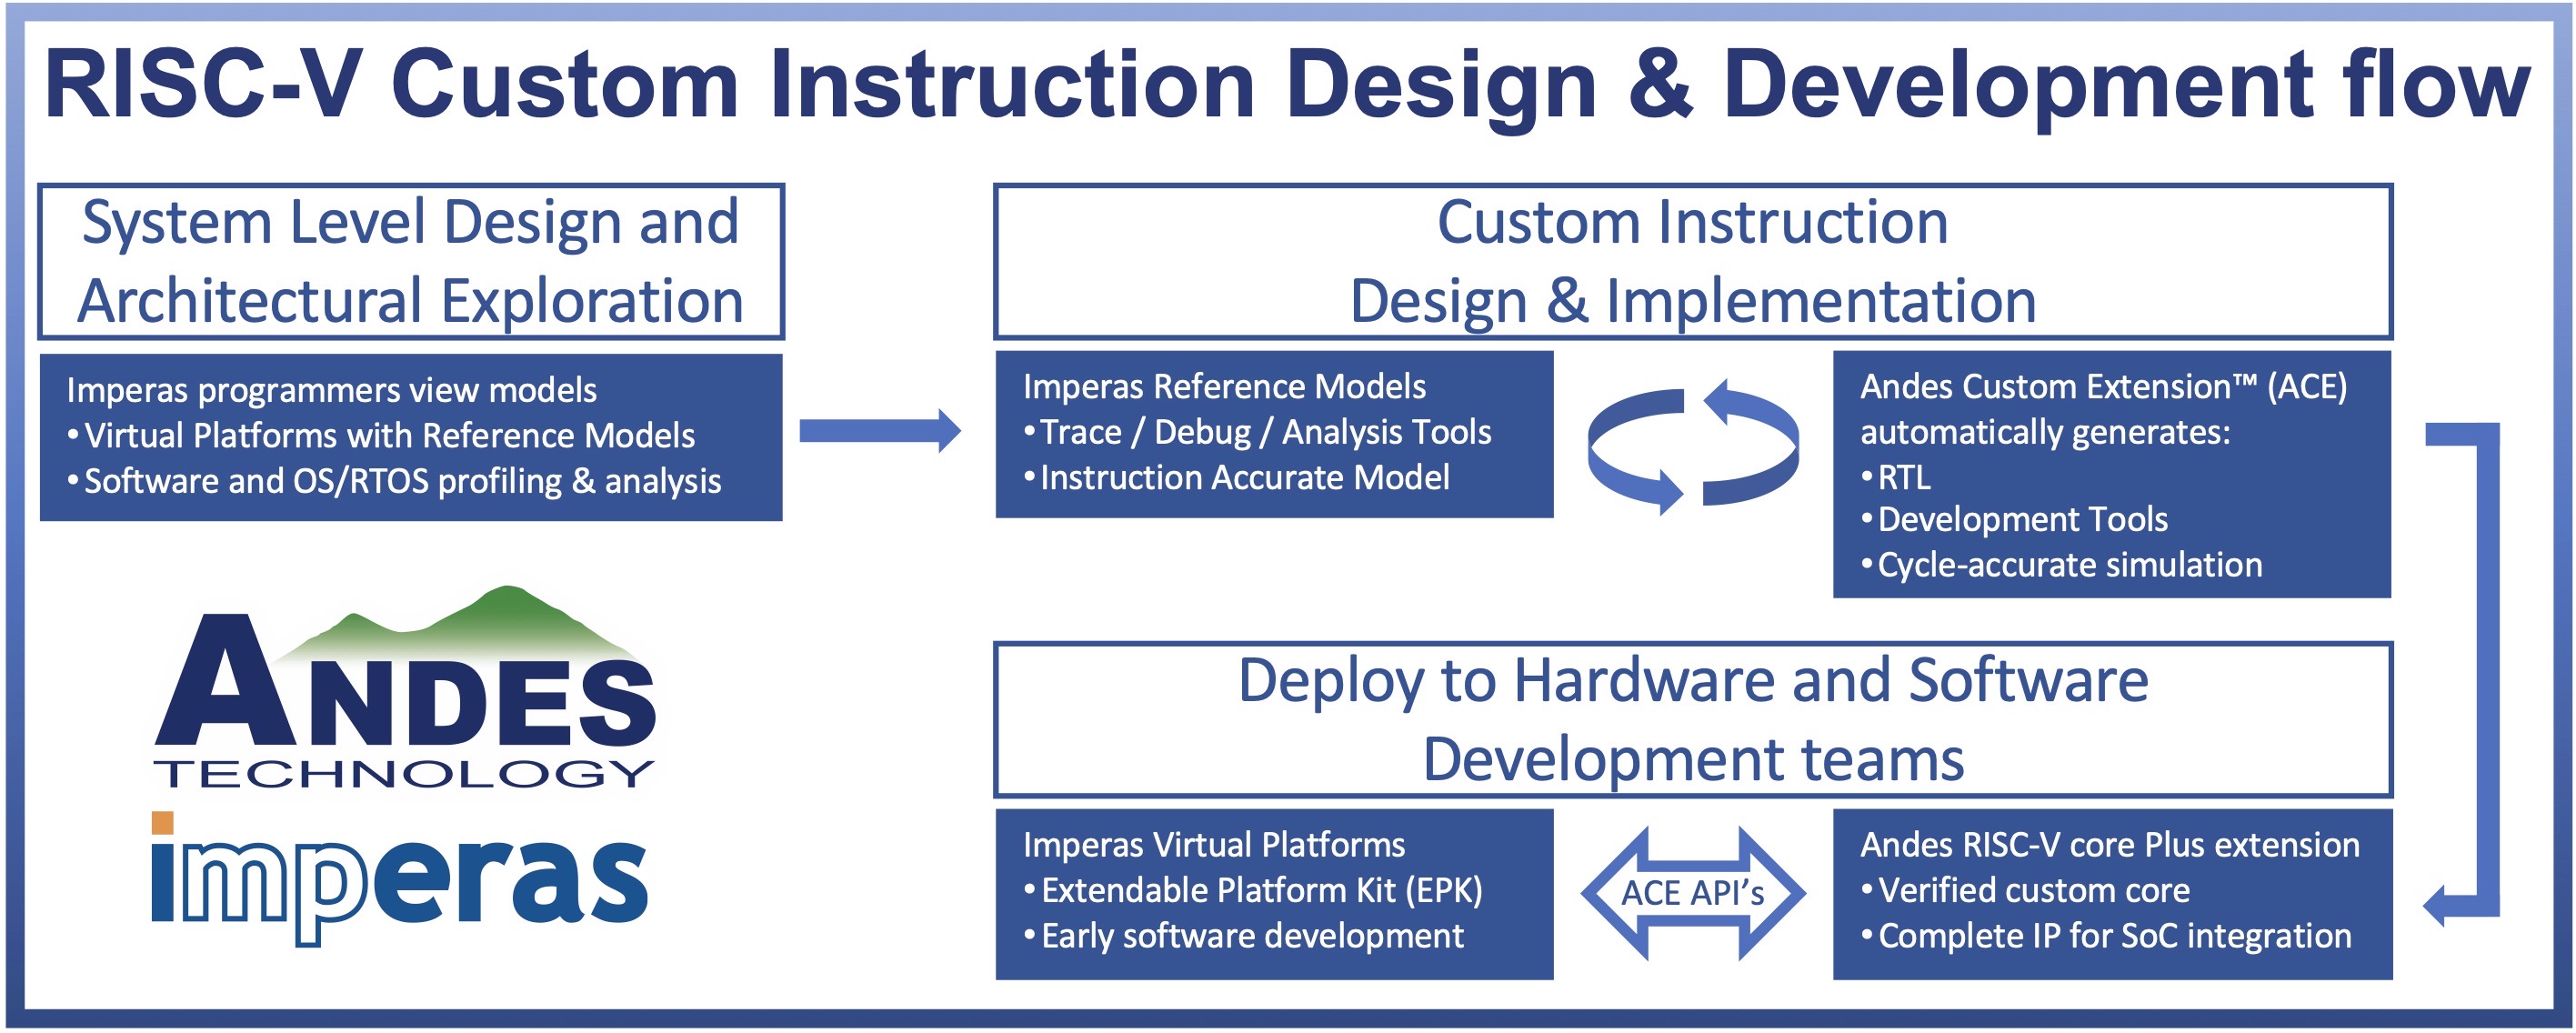 Andes and Imperas custom instruction flow diagram